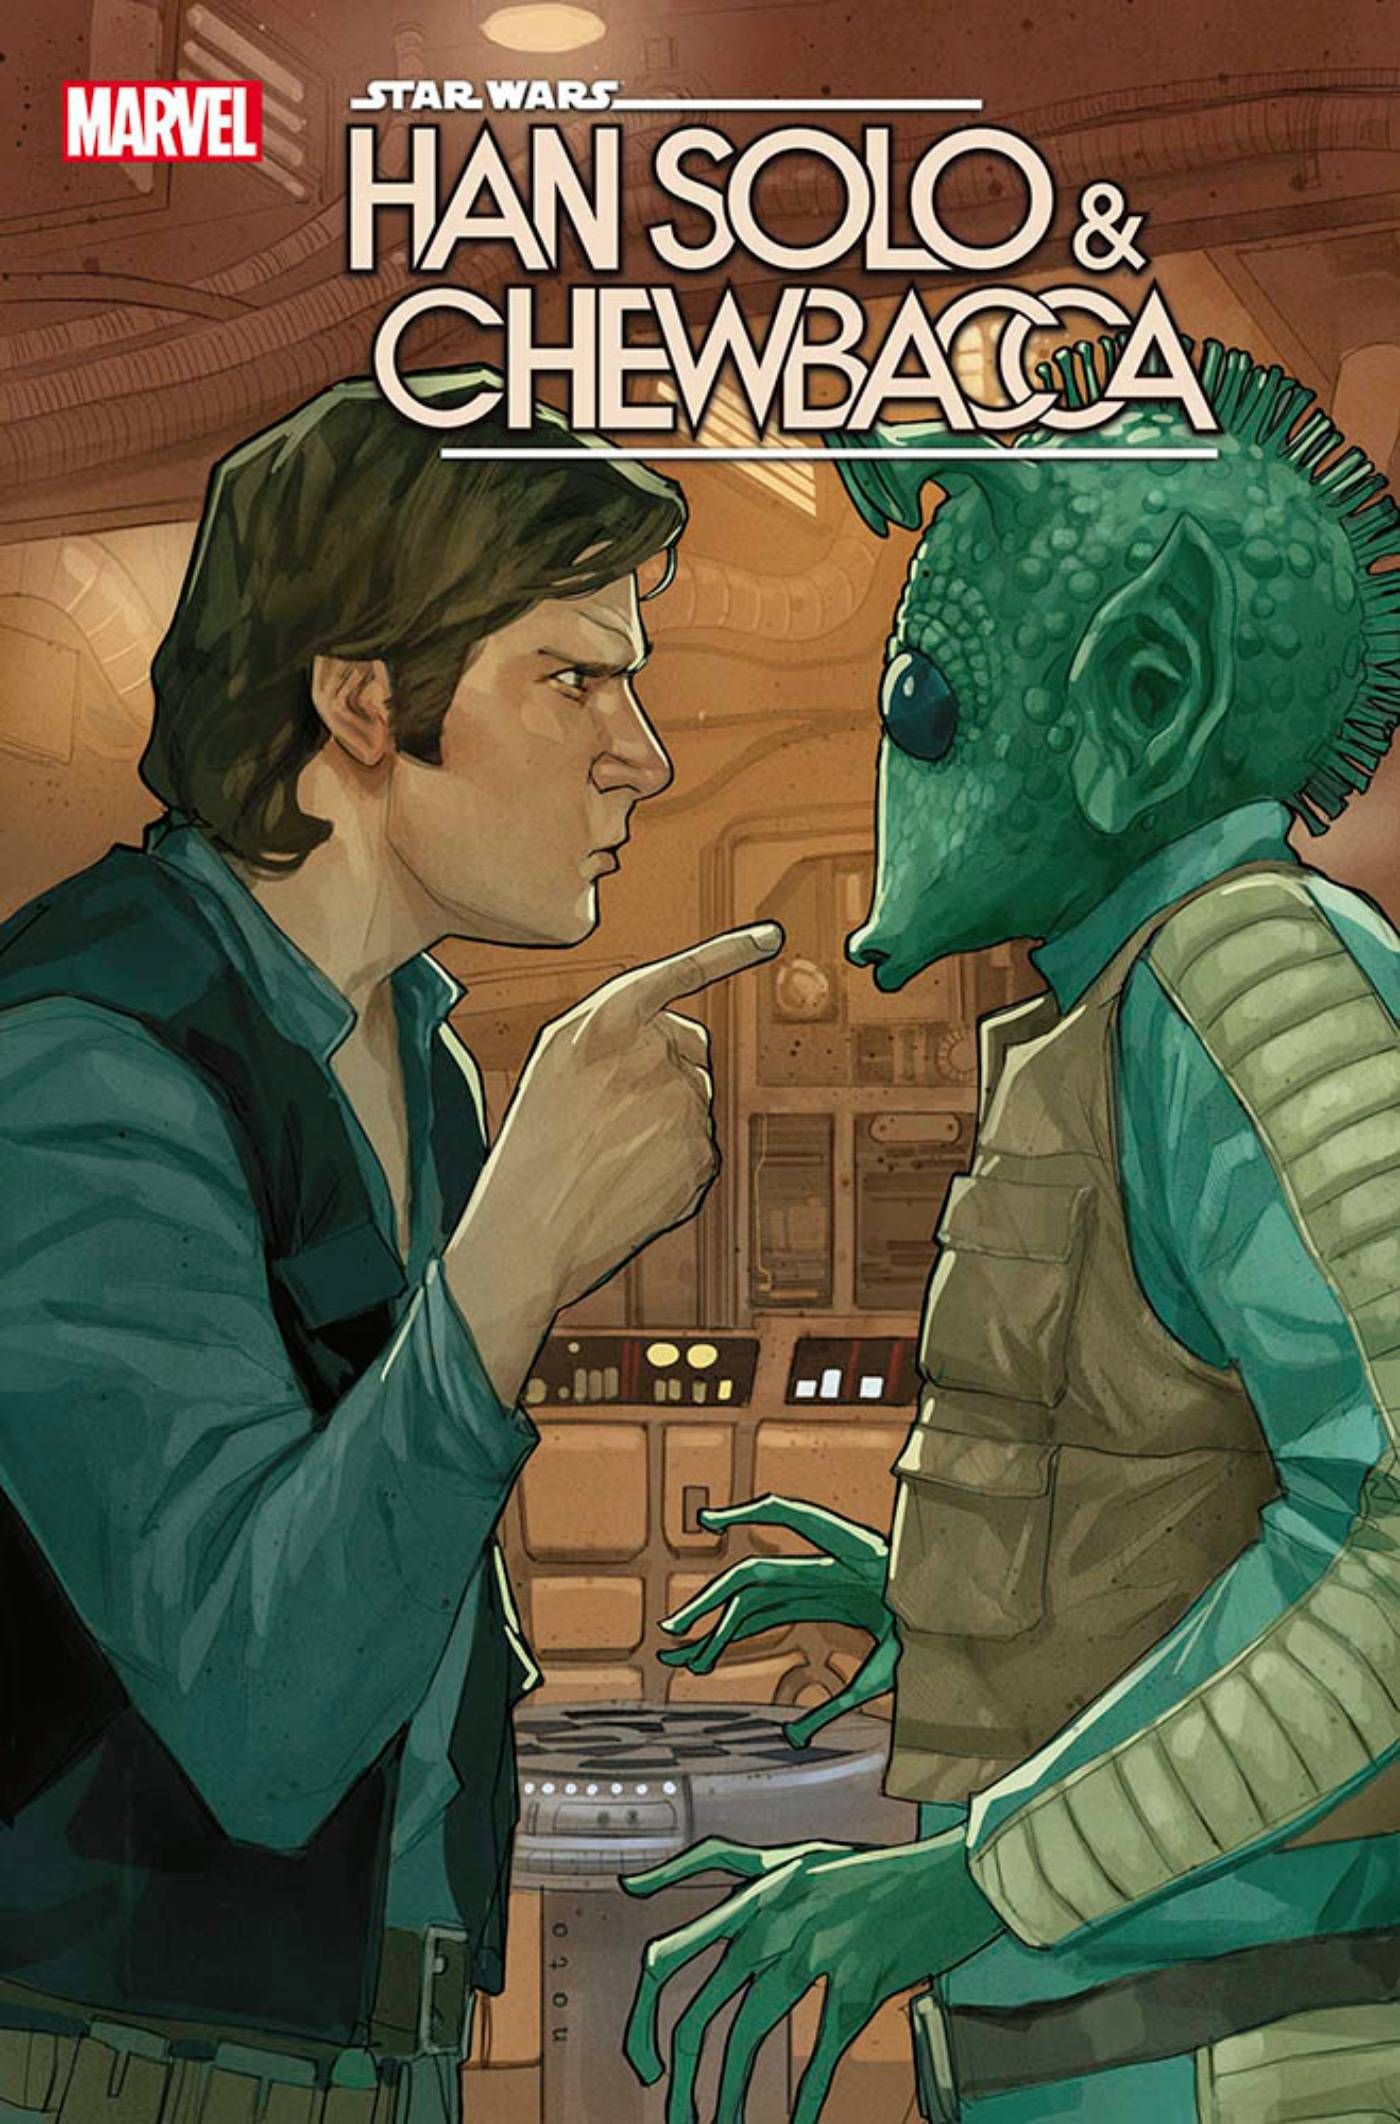 Star Wars Fans Finally Get To See Han & Chewbacca Working For Jabba